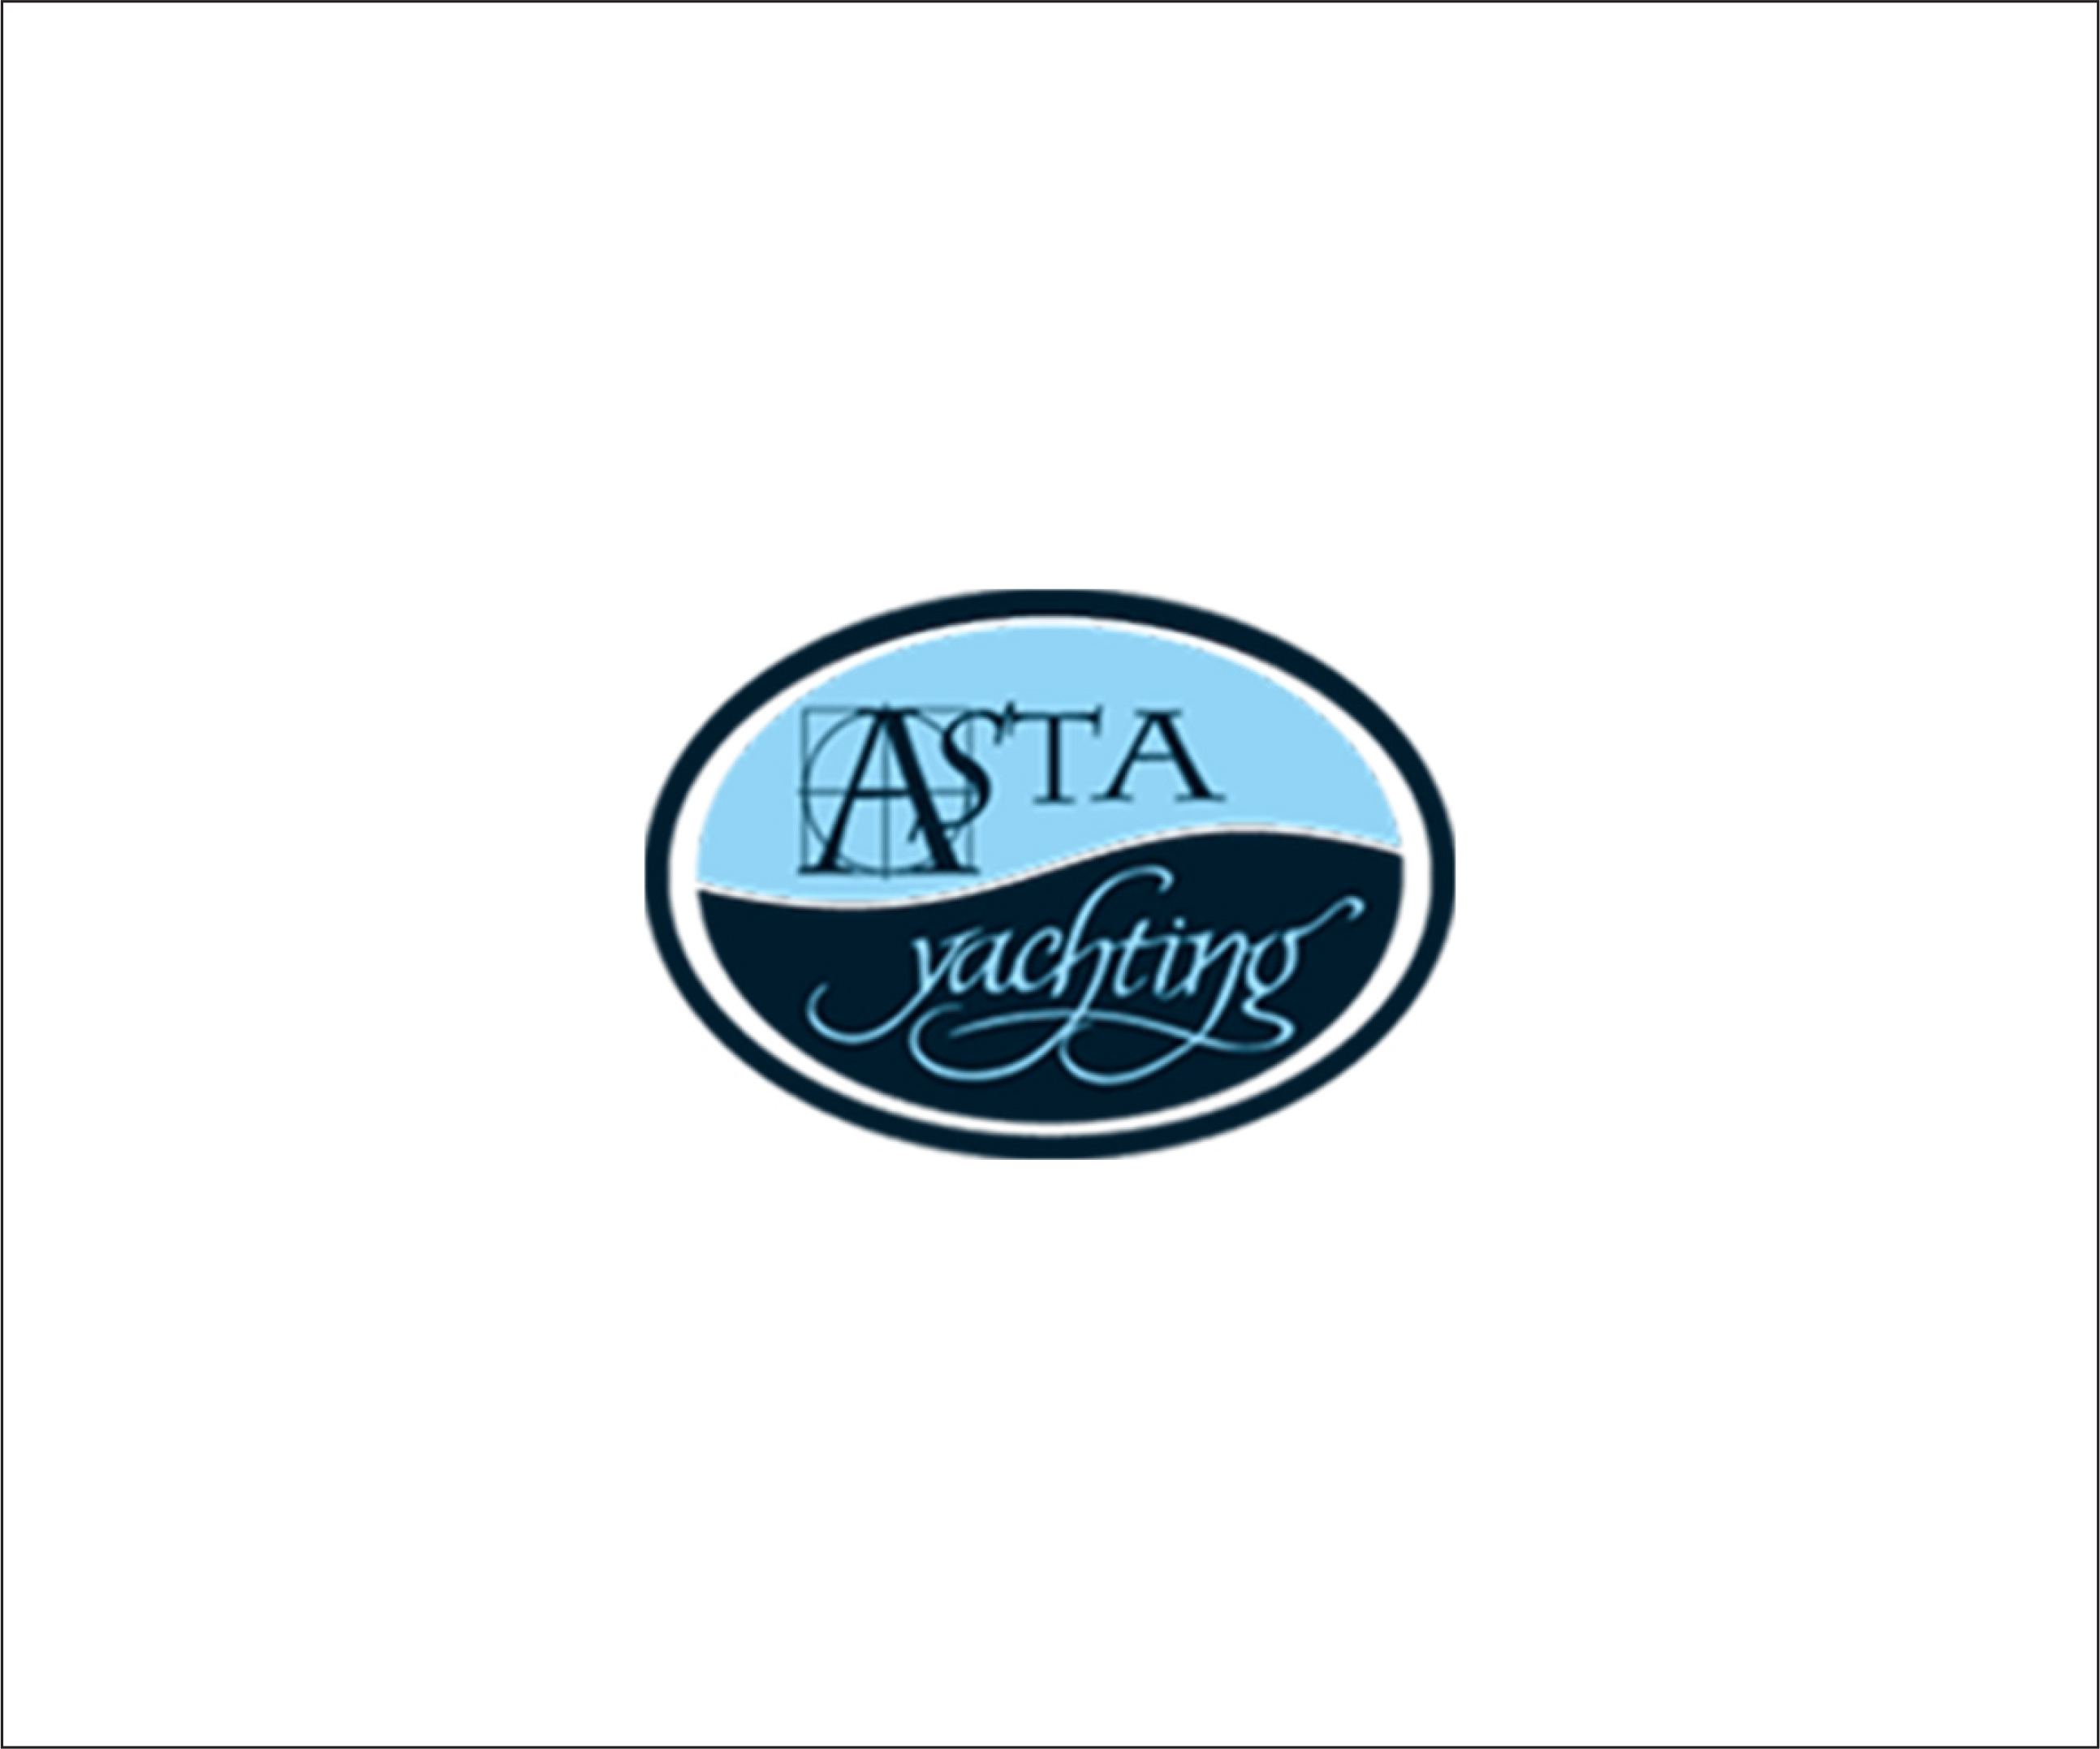 Asta Yachting - 2021 Is The Year of Your Yacht Charter in Croatia